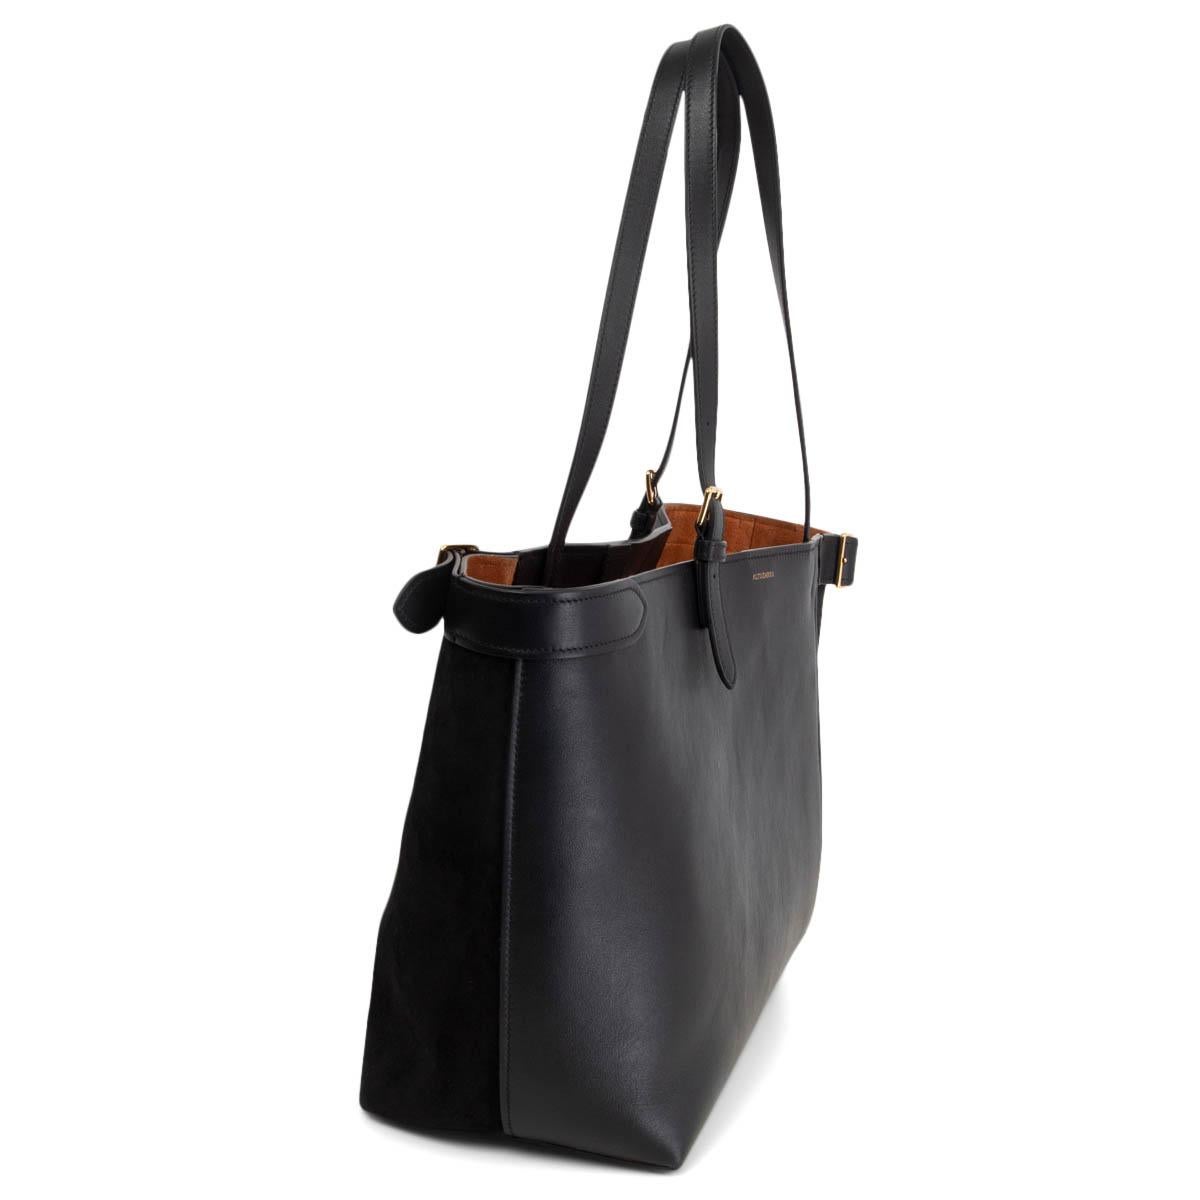 100% authentic Altuzarra Play tote bag is made from black leather and suede with gold-tone metal buckles. Lined in pumpkin suede with one big zipper pocket against the back. Brand new. Comes with dust bag. 

Measurements
Height	29cm